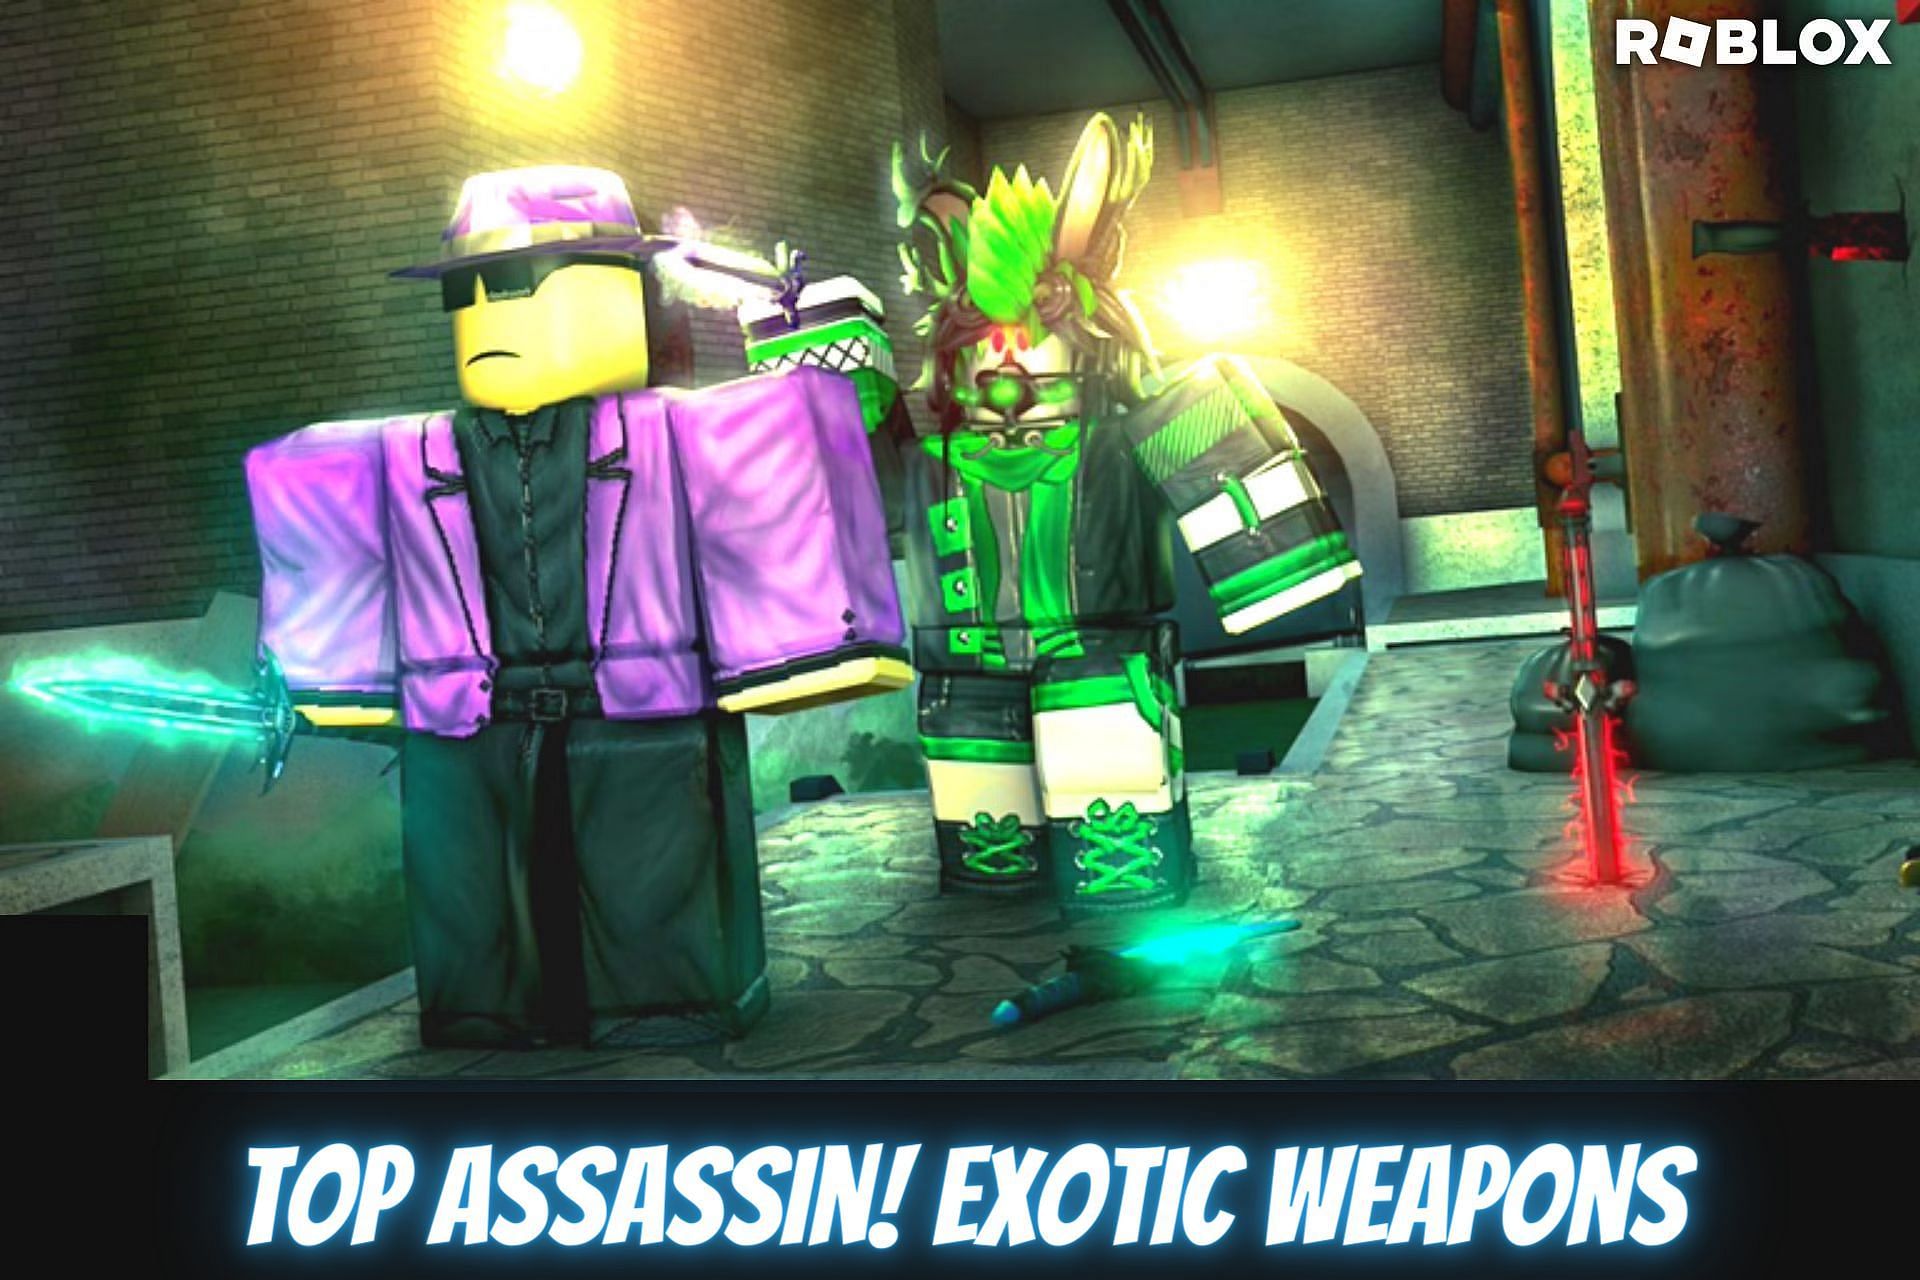 Get the amazing weapons and take down all foes (Image via Roblox)